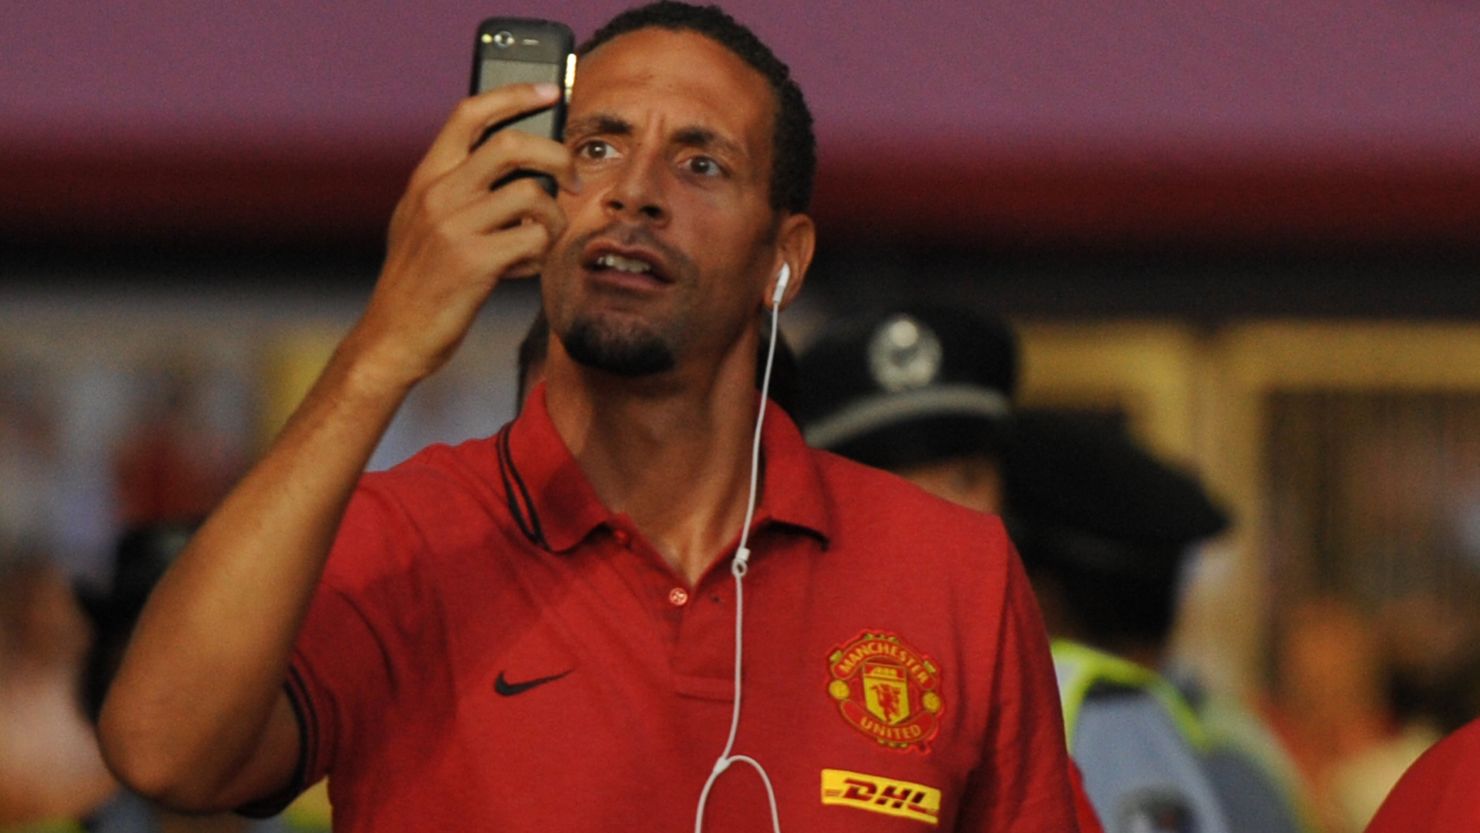 Rio Ferdinand has been found guilty of improper conduct by the English FA for his comment on Twitter